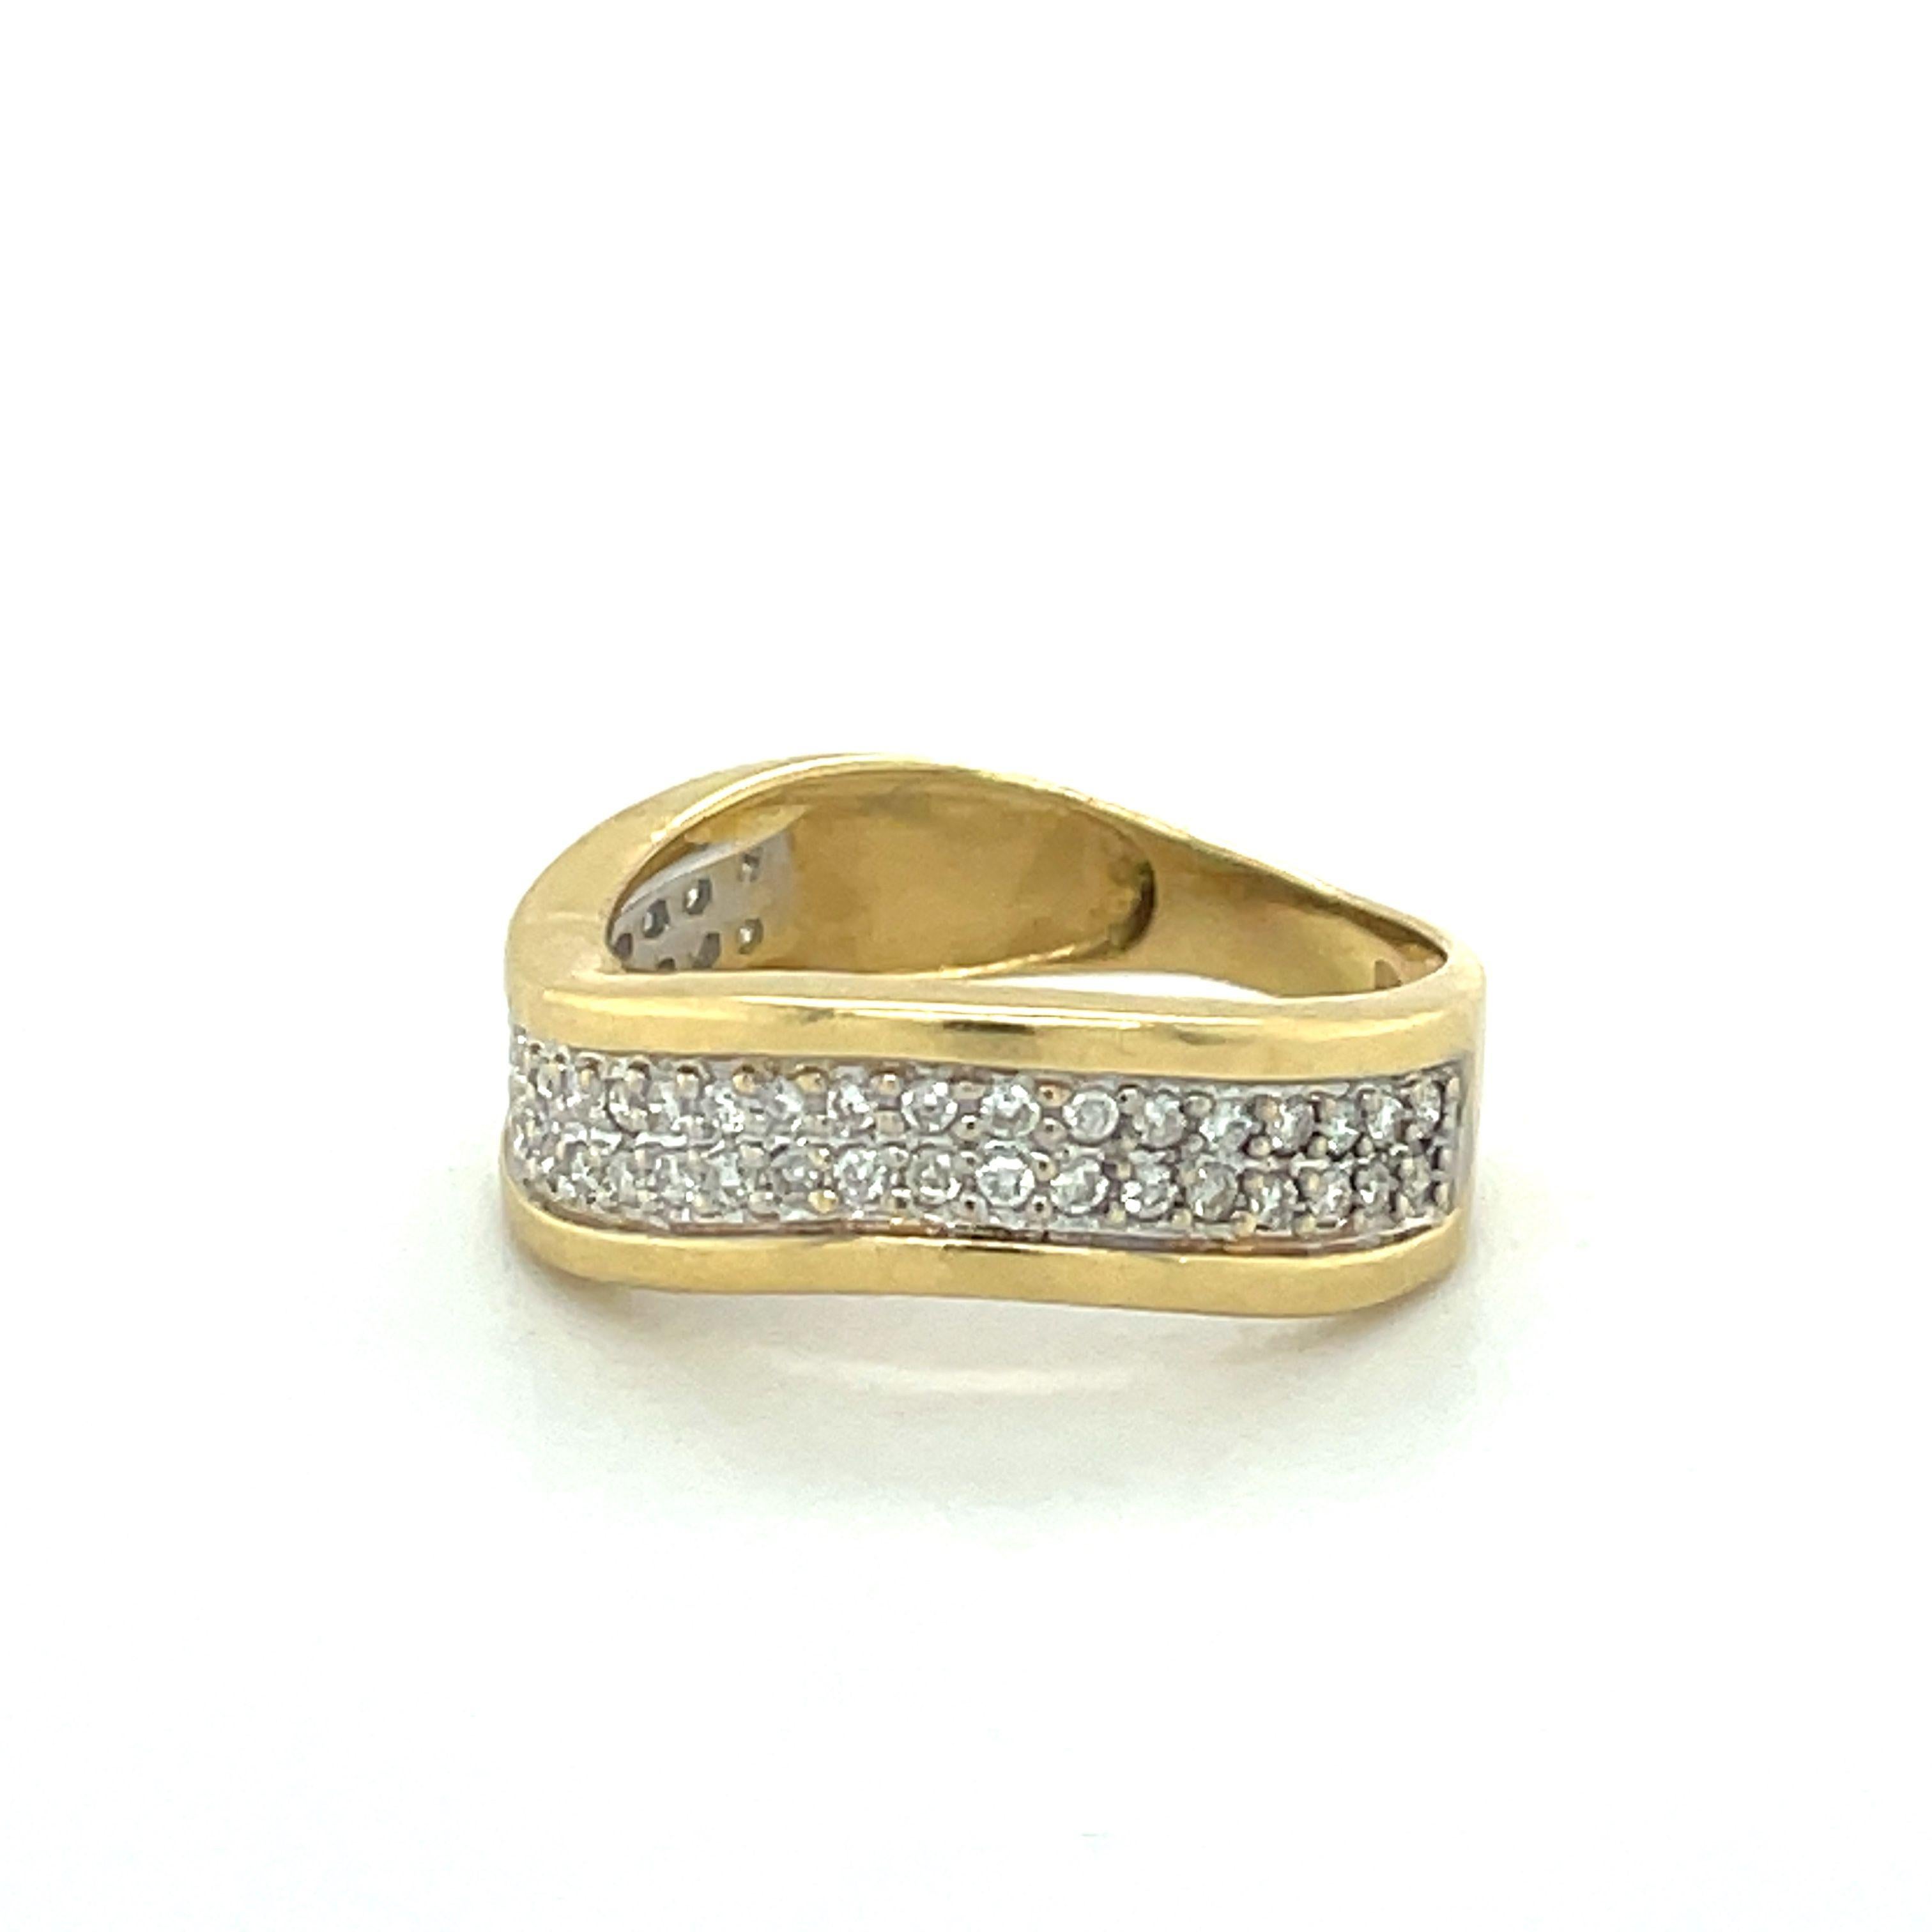 Vintage Gold Wave Band, 0.25CT Diamond, 18k Yellow Gold ring, weddding band ring For Sale 3